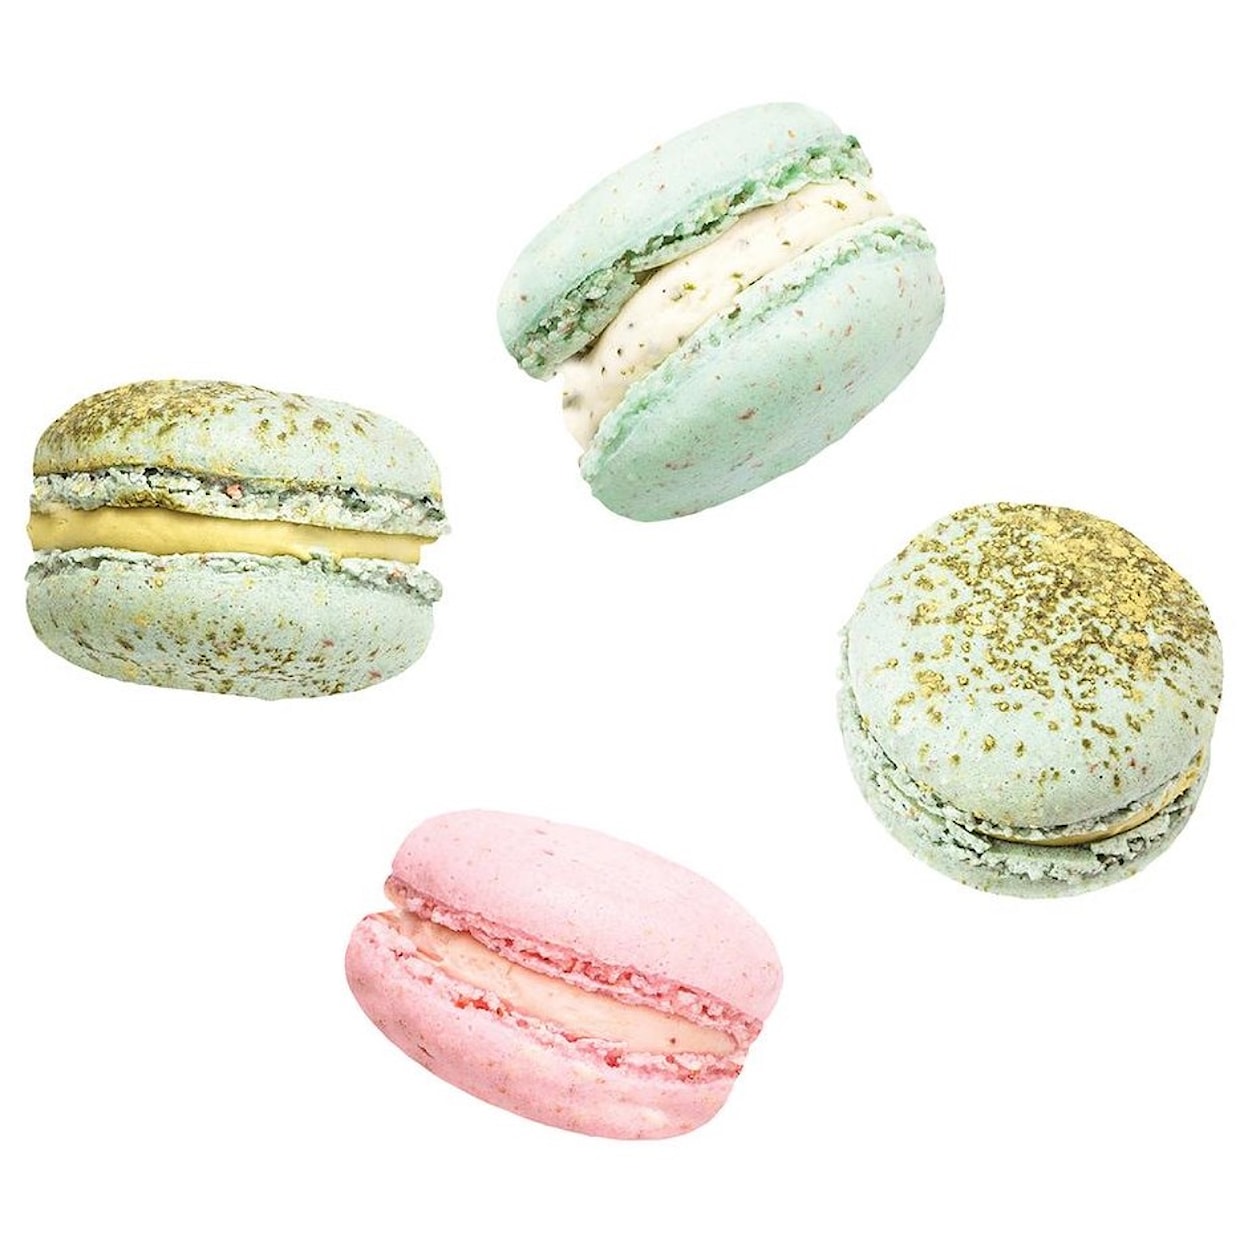 Tempaper Wall Decals French Macaron